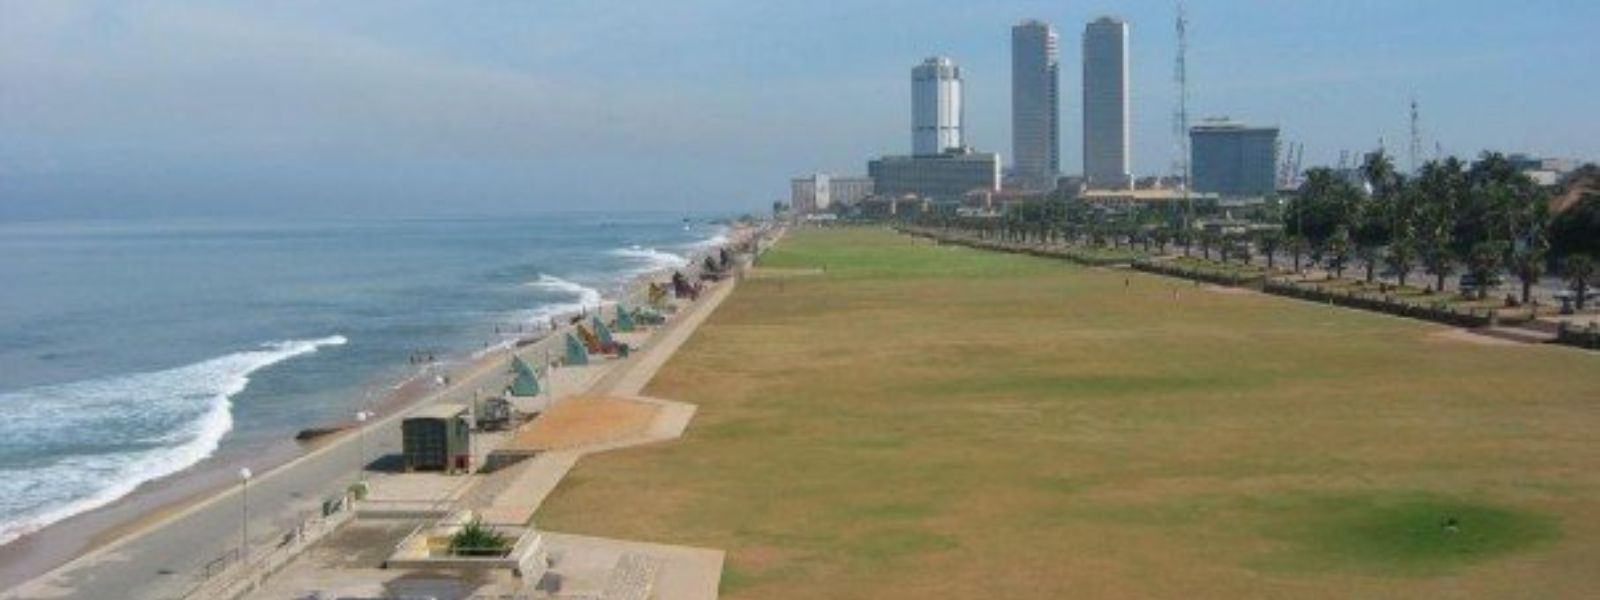 Regulations for food vendors at Galle Face Green